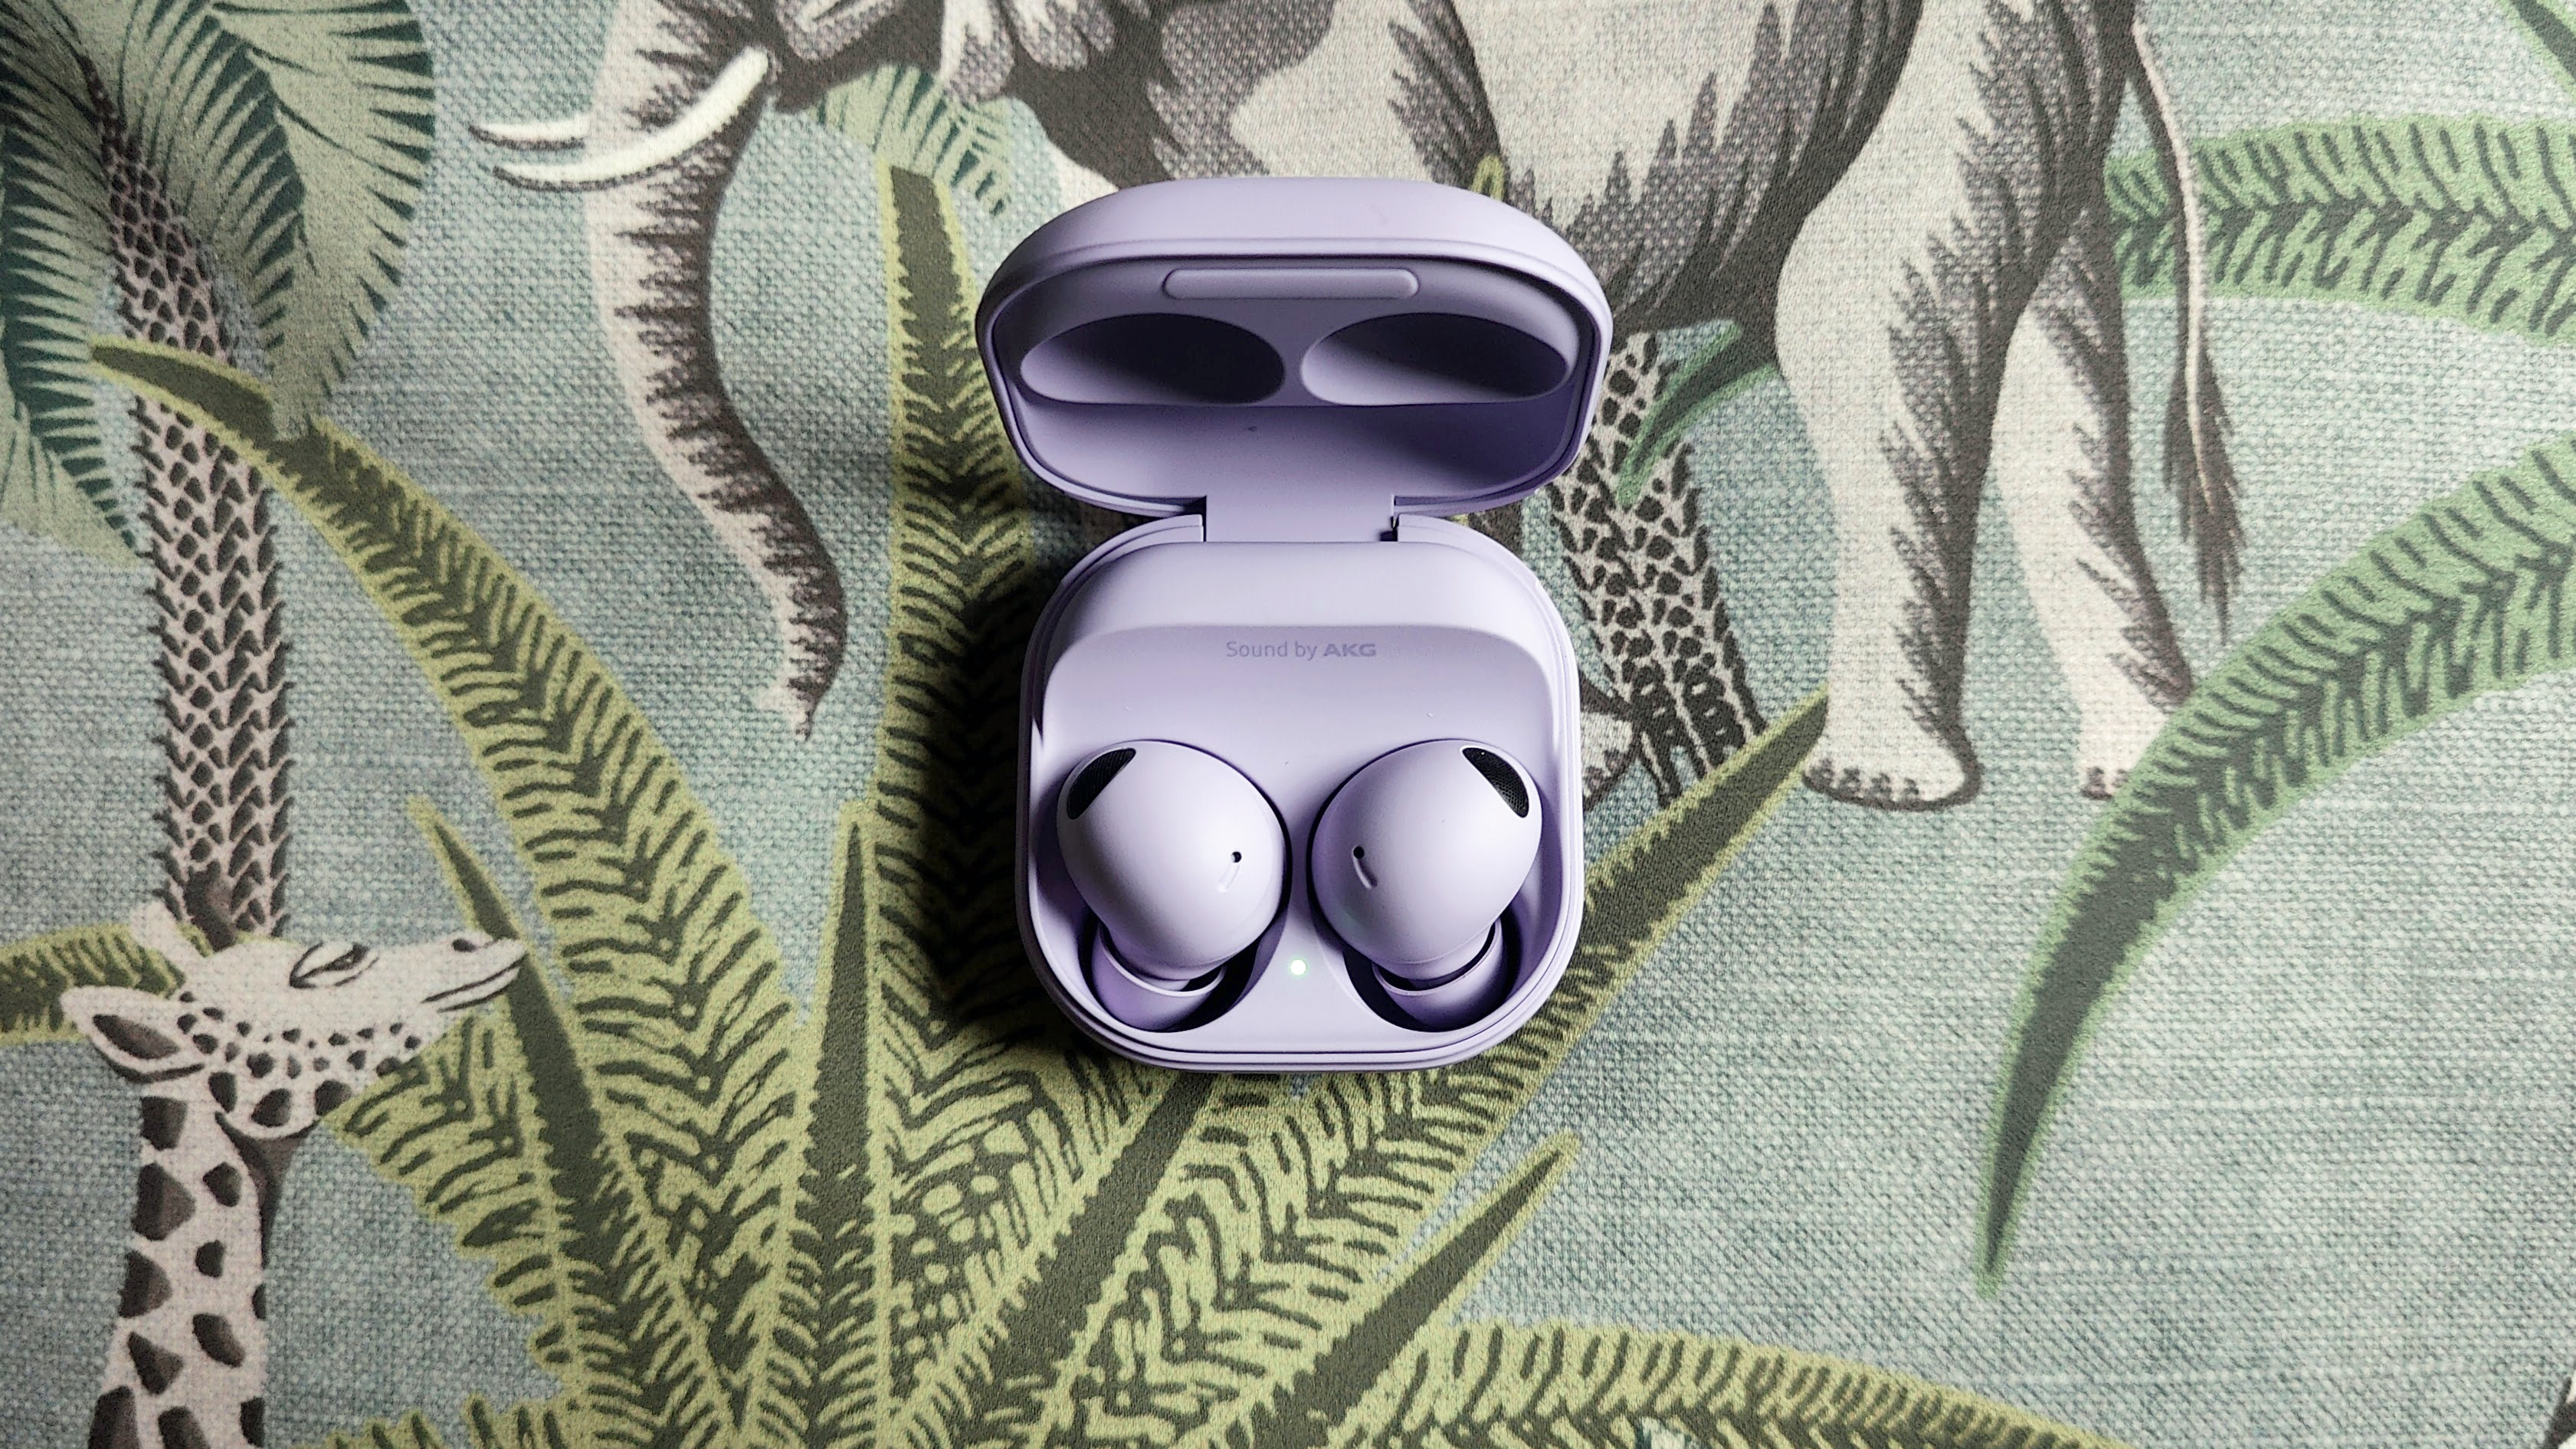 Samsung Galaxy Buds 2 Pro review: Are these $229 earbuds worth it?